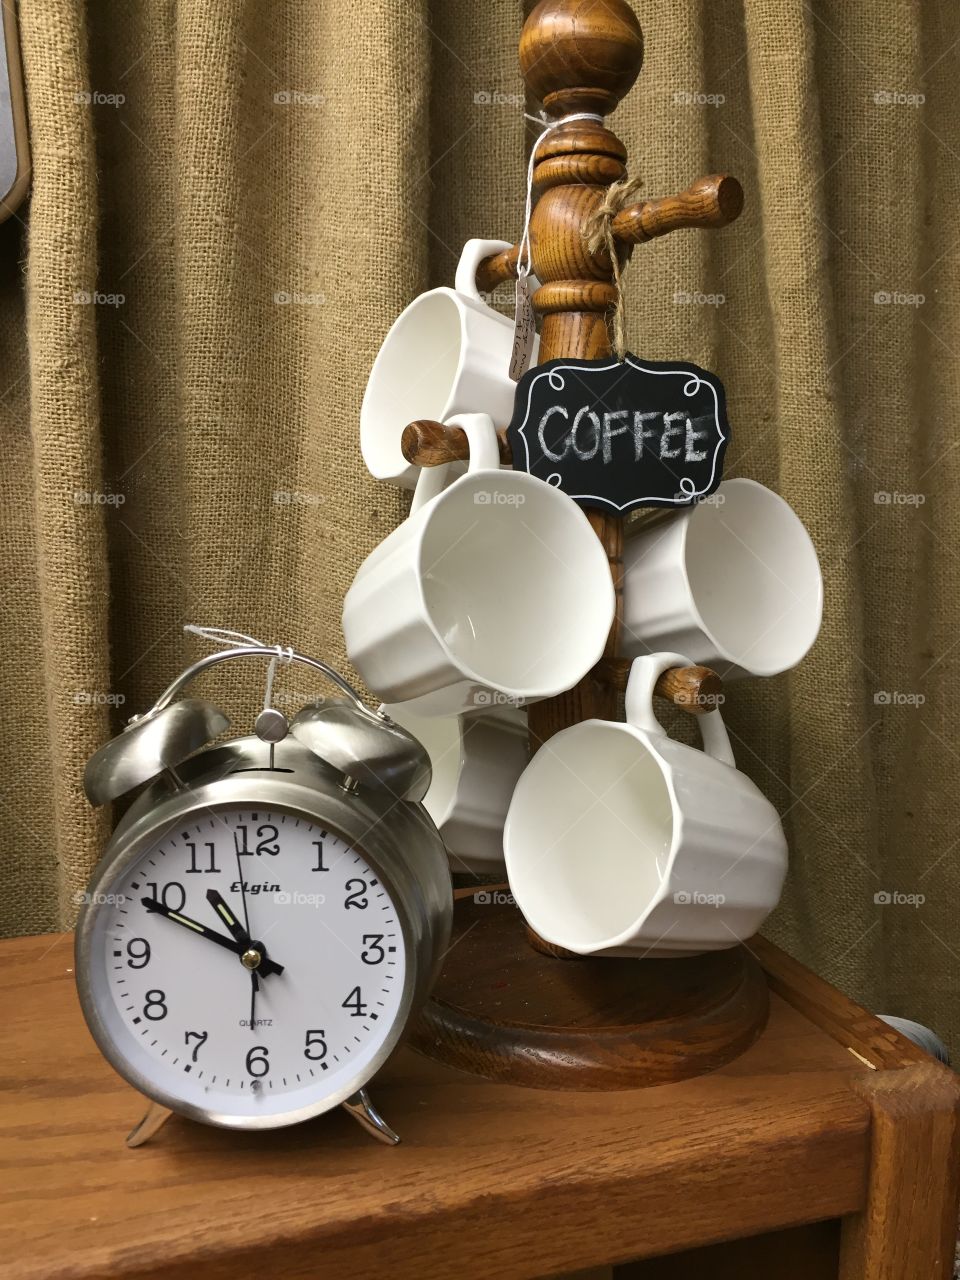 Coffee cups and clock

